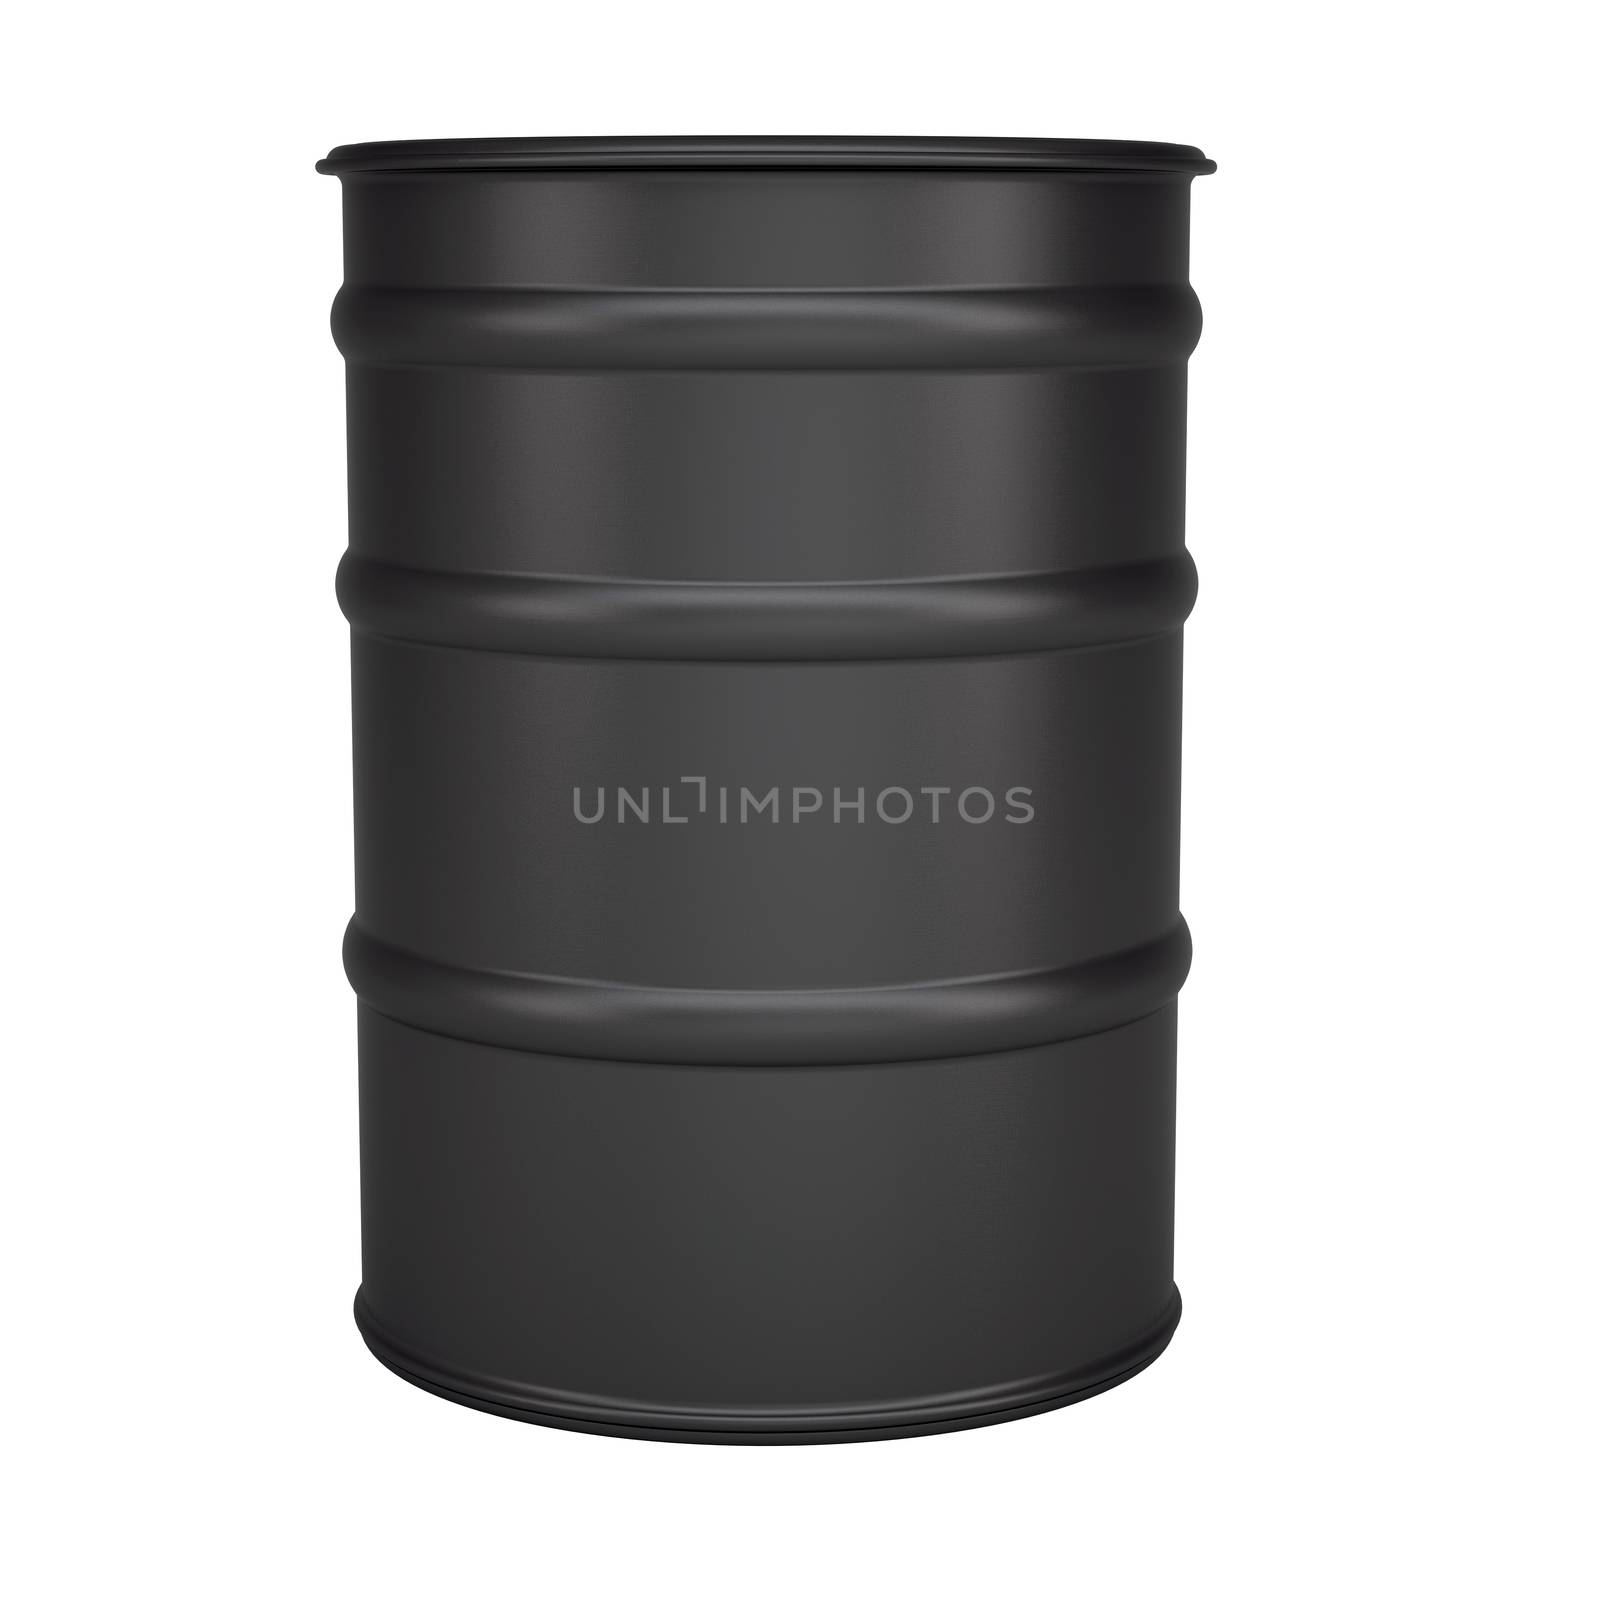 Black barrel. Isolated render on a white background